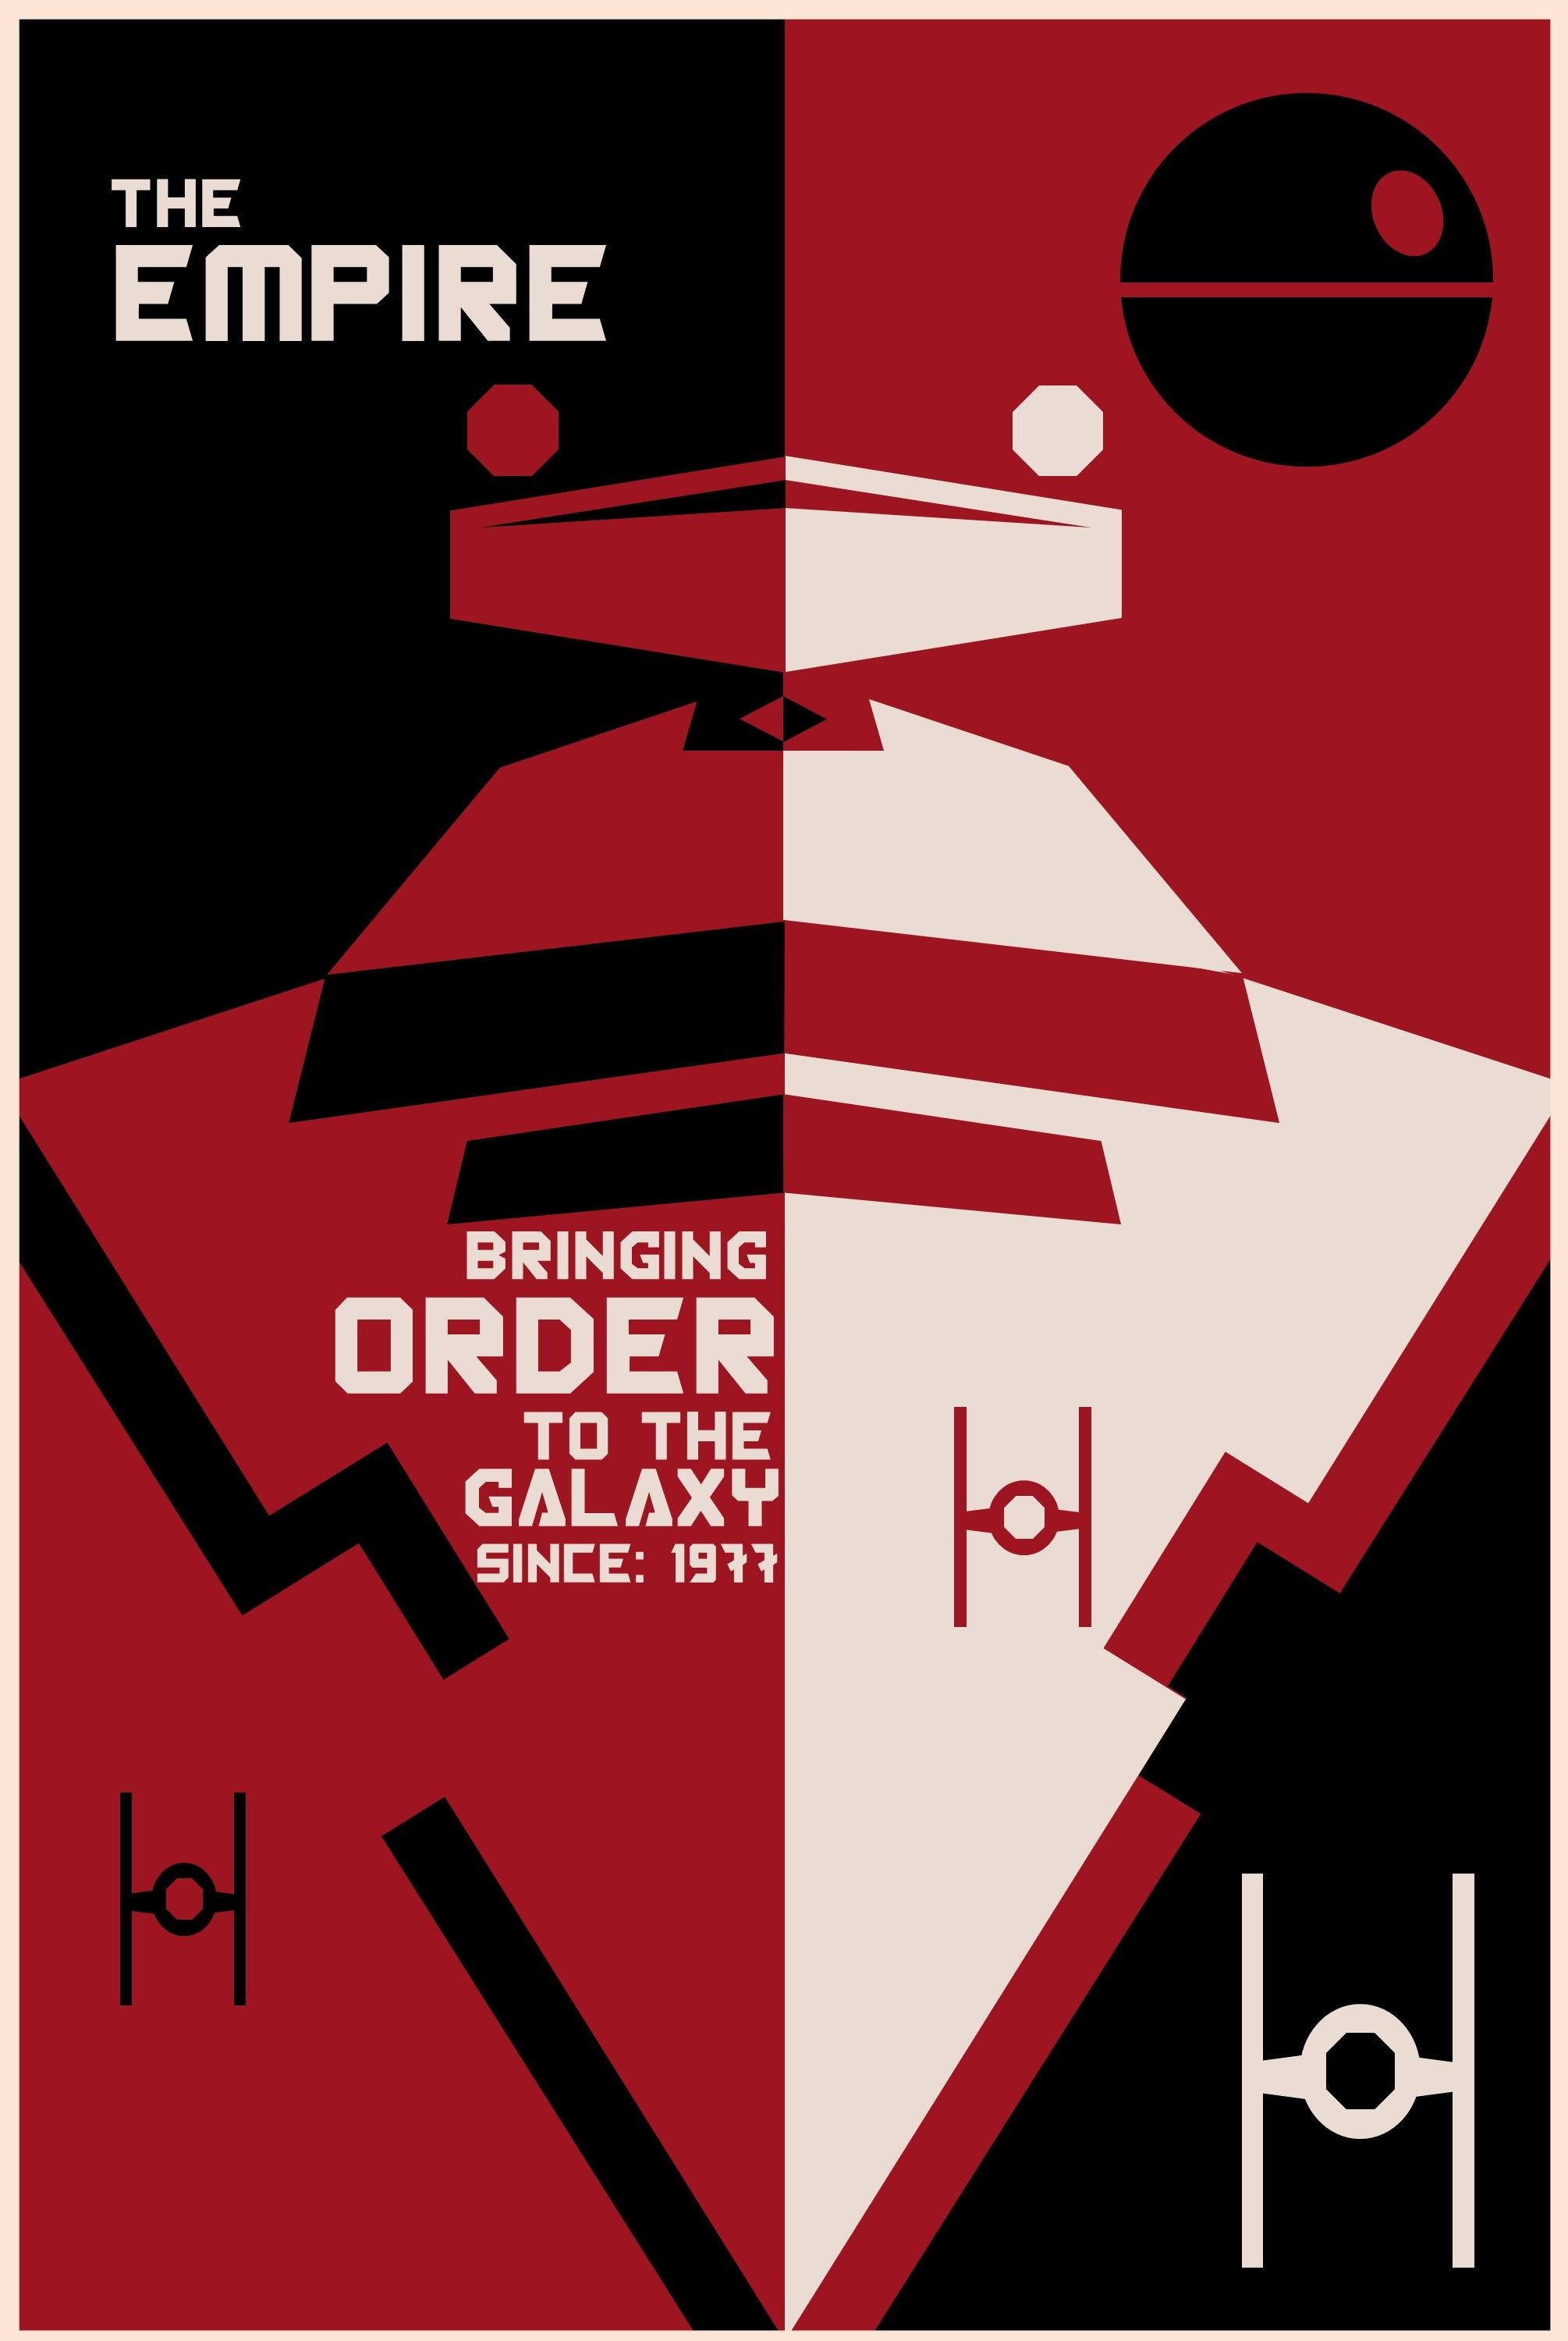 2010x3000 A remake of one of Budapest, Hungary based Szoki's Star Wars propaganda  posters. His